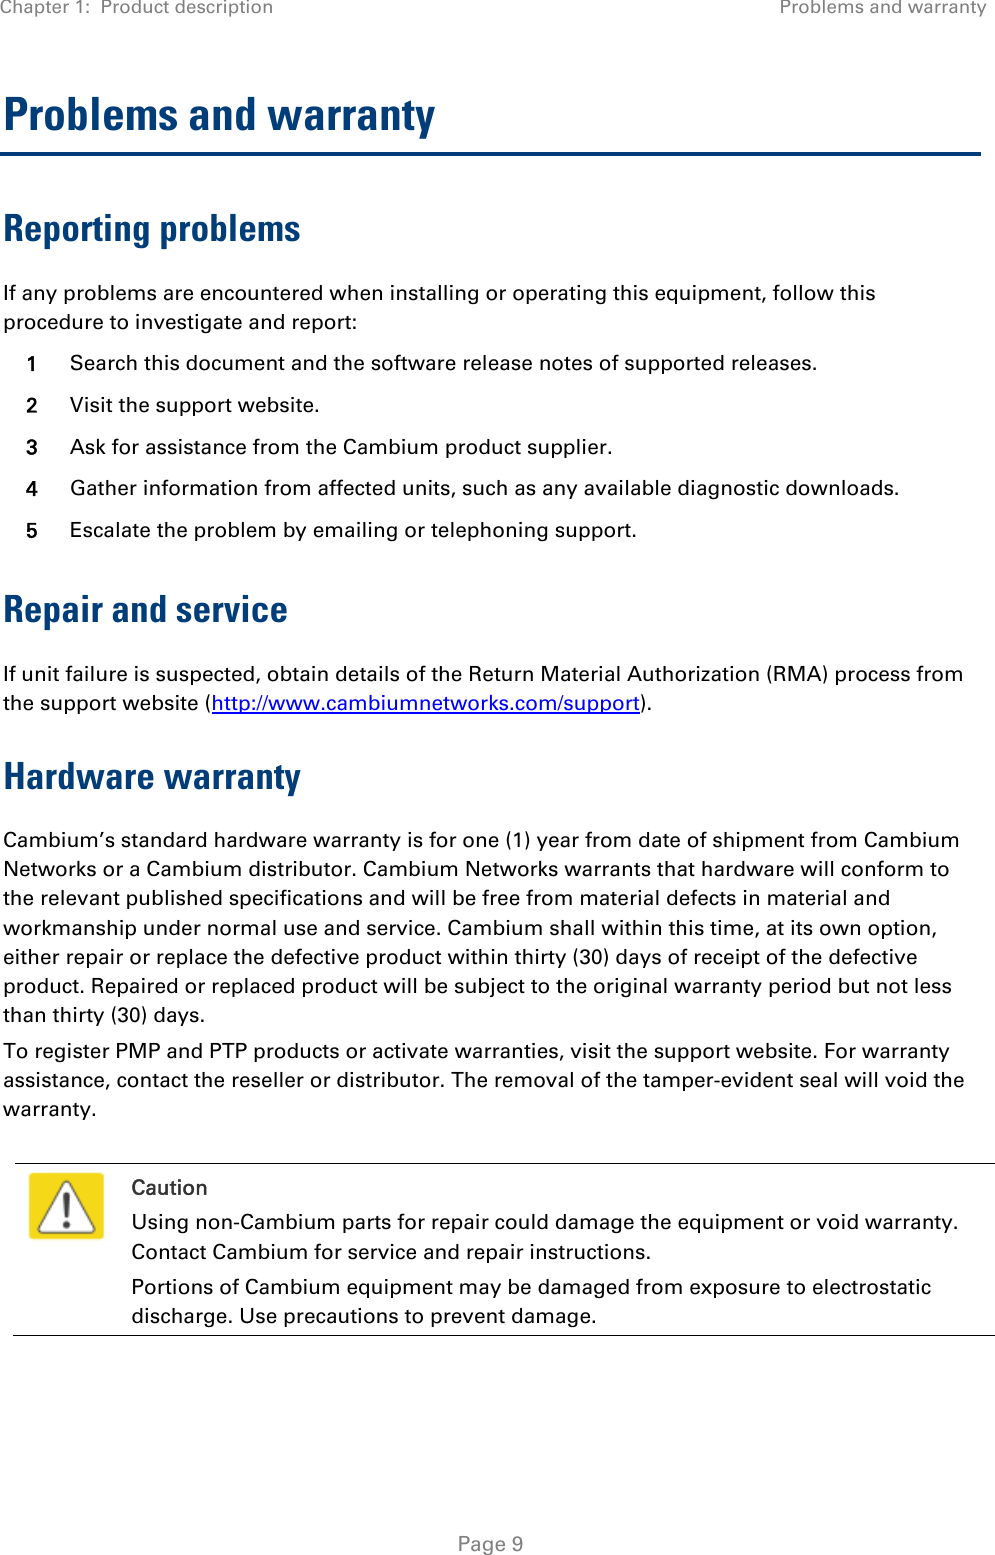 Chapter 1:  Product description  Problems and warranty   Page 9 Problems and warranty Reporting problems If any problems are encountered when installing or operating this equipment, follow this procedure to investigate and report: 1  Search this document and the software release notes of supported releases. 2  Visit the support website. 3  Ask for assistance from the Cambium product supplier. 4  Gather information from affected units, such as any available diagnostic downloads. 5  Escalate the problem by emailing or telephoning support. Repair and service If unit failure is suspected, obtain details of the Return Material Authorization (RMA) process from the support website (http://www.cambiumnetworks.com/support). Hardware warranty Cambium’s standard hardware warranty is for one (1) year from date of shipment from Cambium Networks or a Cambium distributor. Cambium Networks warrants that hardware will conform to the relevant published specifications and will be free from material defects in material and workmanship under normal use and service. Cambium shall within this time, at its own option, either repair or replace the defective product within thirty (30) days of receipt of the defective product. Repaired or replaced product will be subject to the original warranty period but not less than thirty (30) days. To register PMP and PTP products or activate warranties, visit the support website. For warranty assistance, contact the reseller or distributor. The removal of the tamper-evident seal will void the warranty.   Caution Using non-Cambium parts for repair could damage the equipment or void warranty. Contact Cambium for service and repair instructions. Portions of Cambium equipment may be damaged from exposure to electrostatic discharge. Use precautions to prevent damage.  